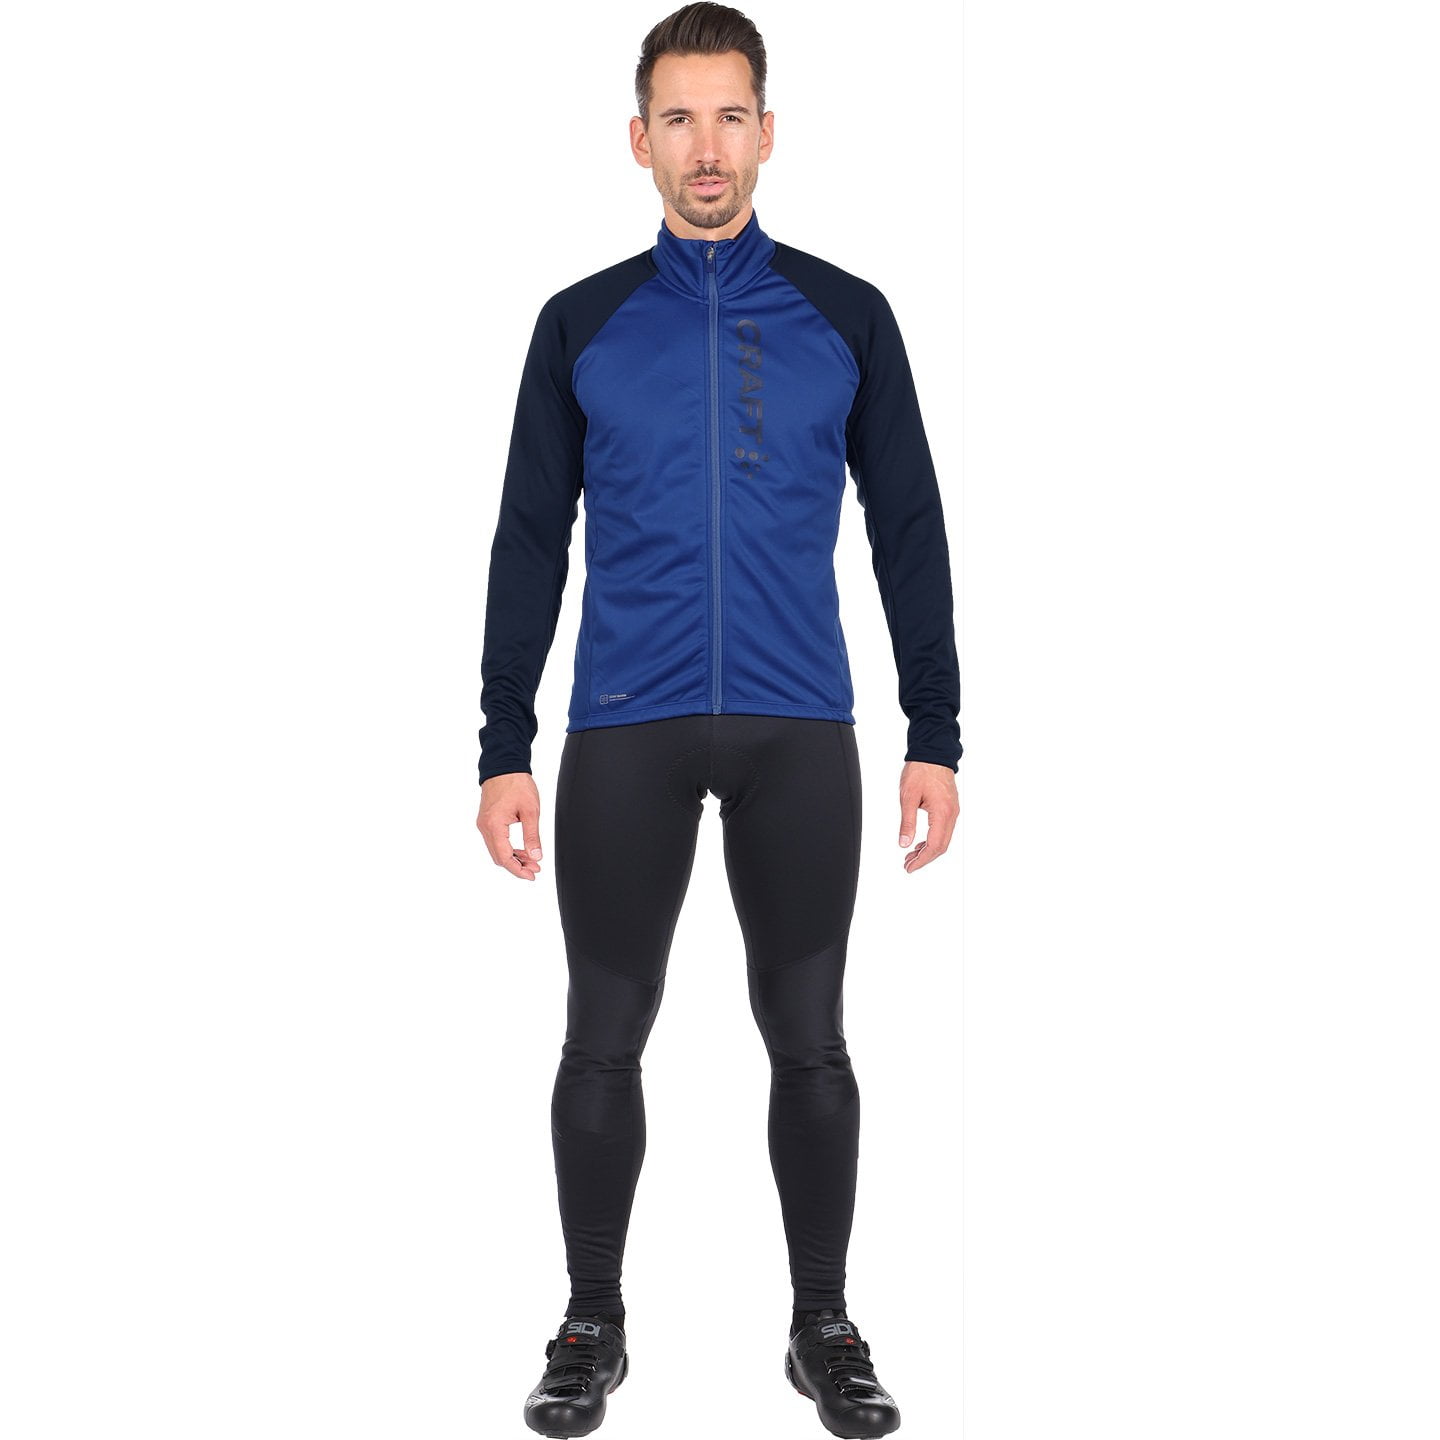 CRAFT Core SubZ Set (winter jacket + cycling tights) Set (2 pieces), for men